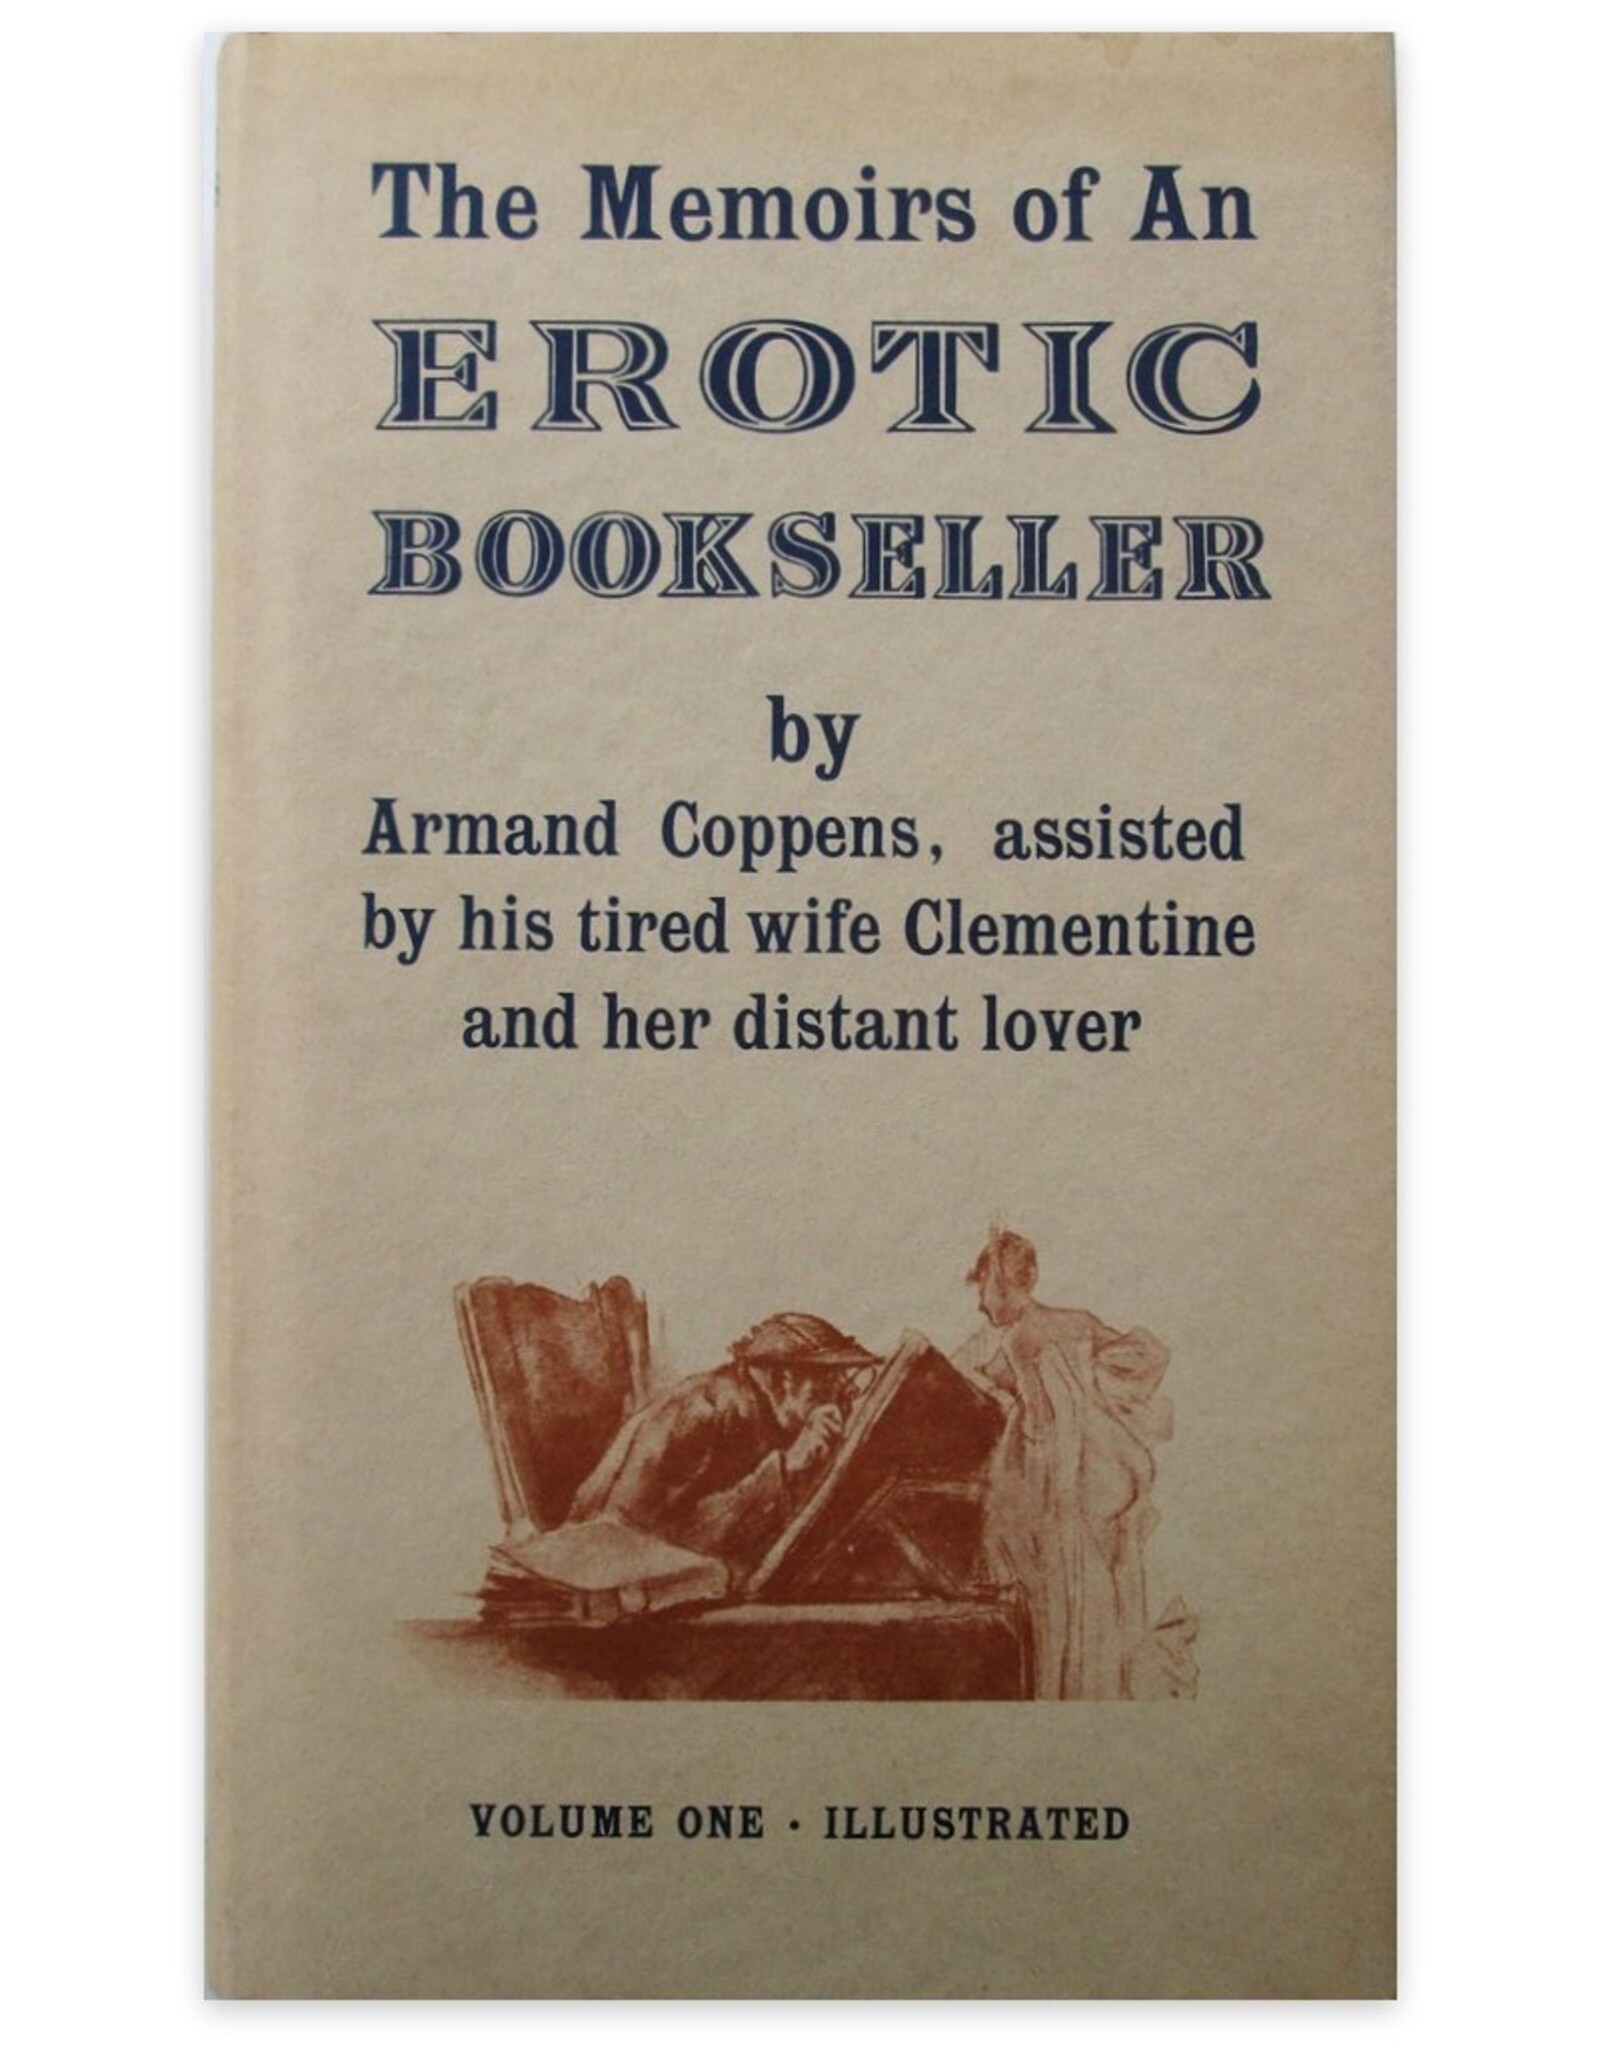 Armand Coppens - The Memoirs of An Erotic Bookseller [...] assisted by his tired wife Clementine and her distant lover. Volume One